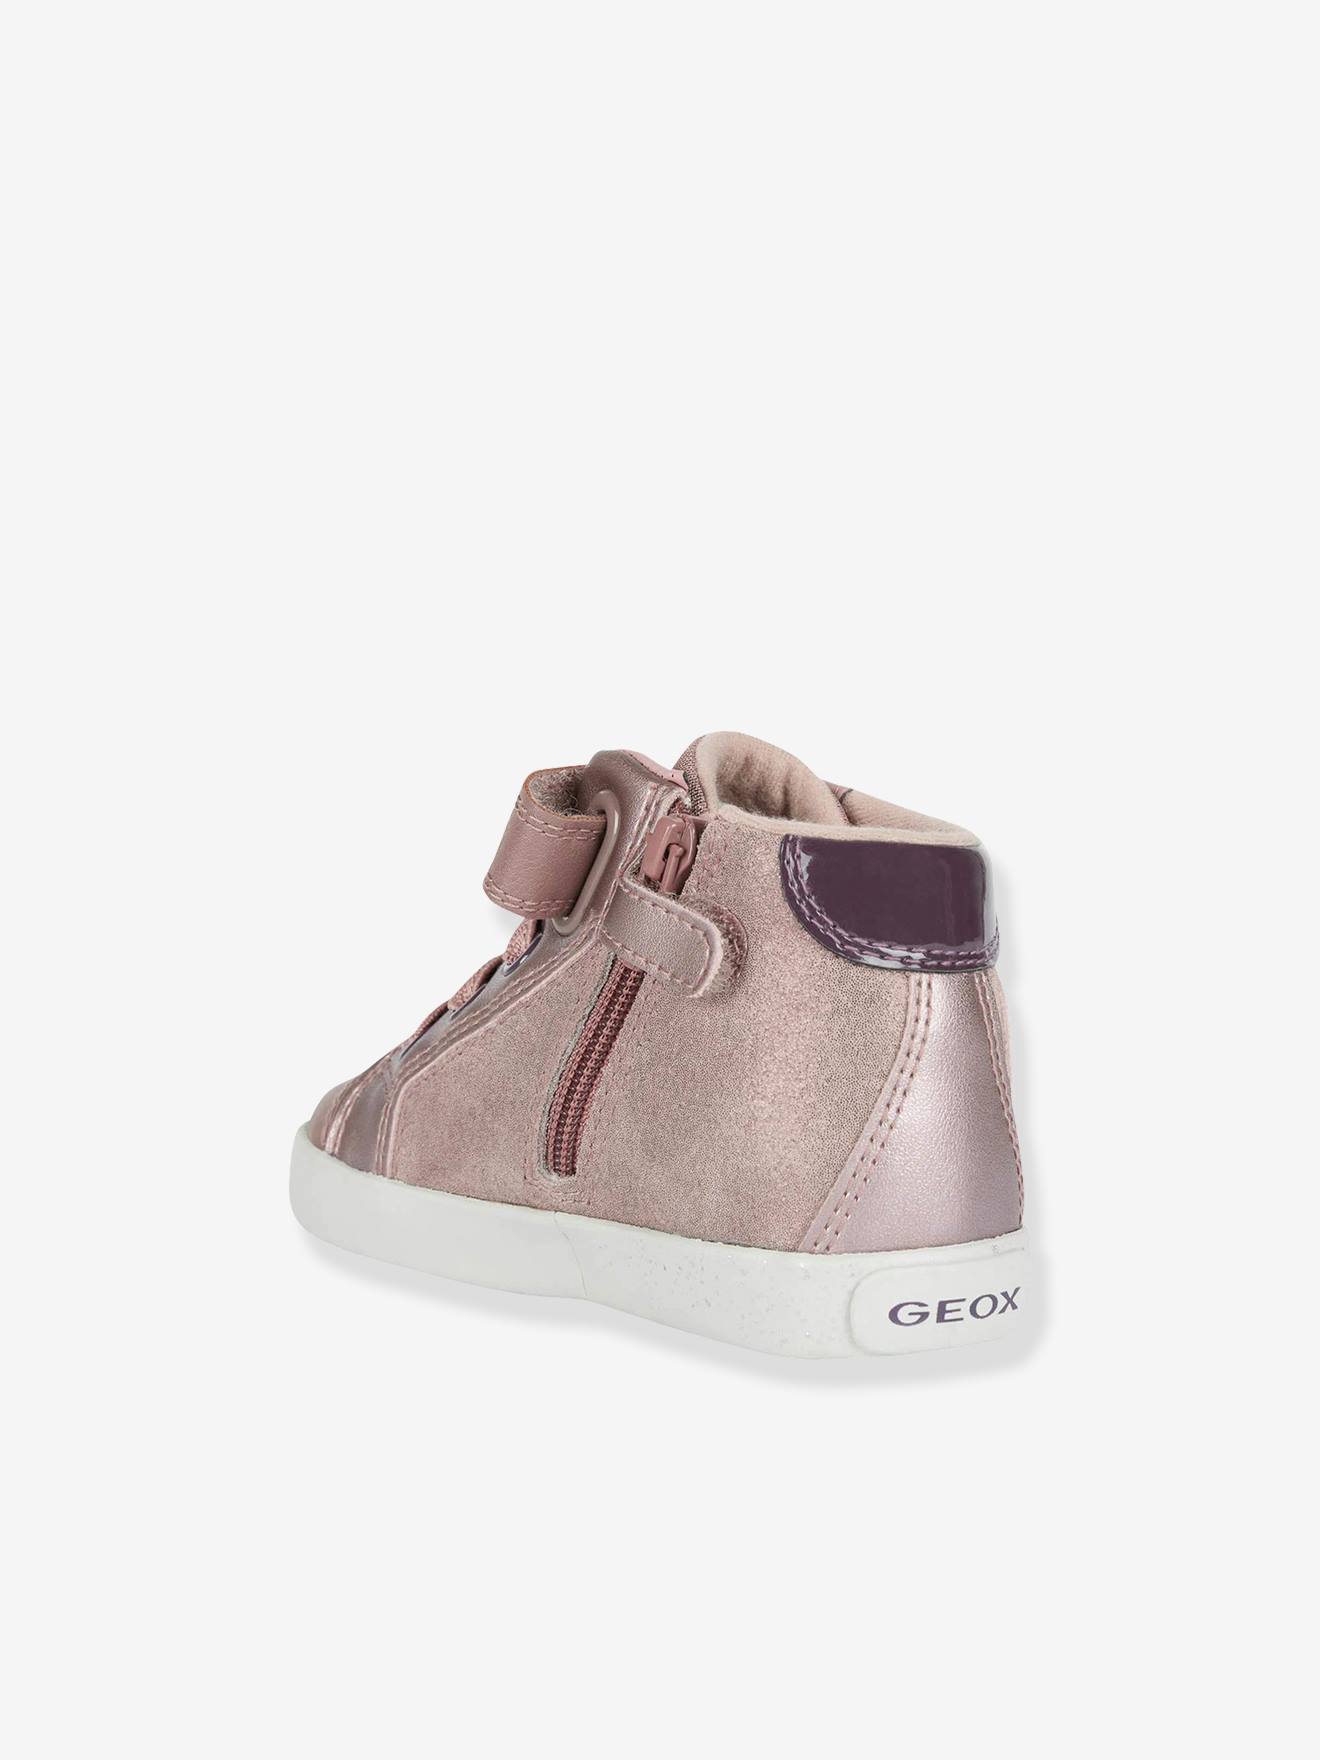 High-Top Trainers Girls, Kilwi by GEOX®, Shoes